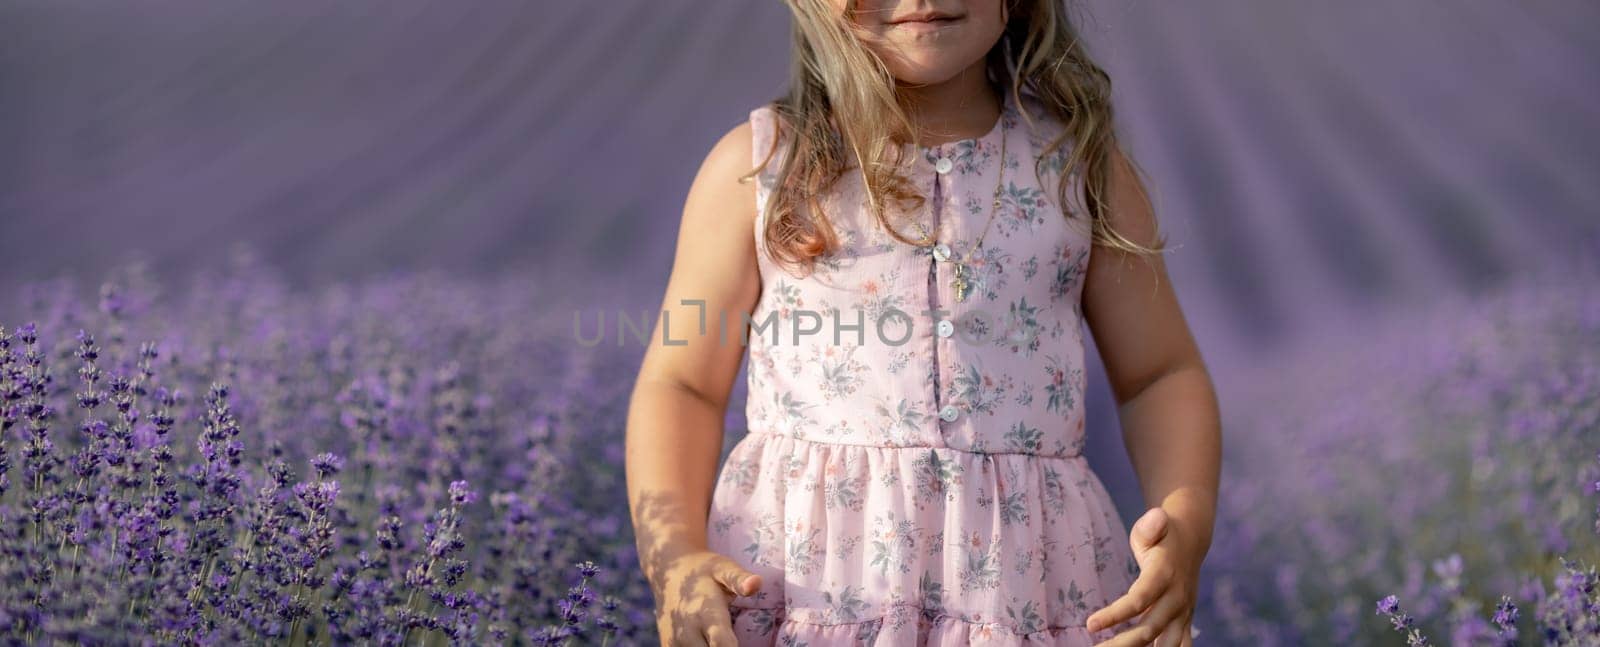 Lavender field girl. happy girl in pink dress in a lilac field of lavender. Aromatherapy concept, lavender oil, photo session in lavender.